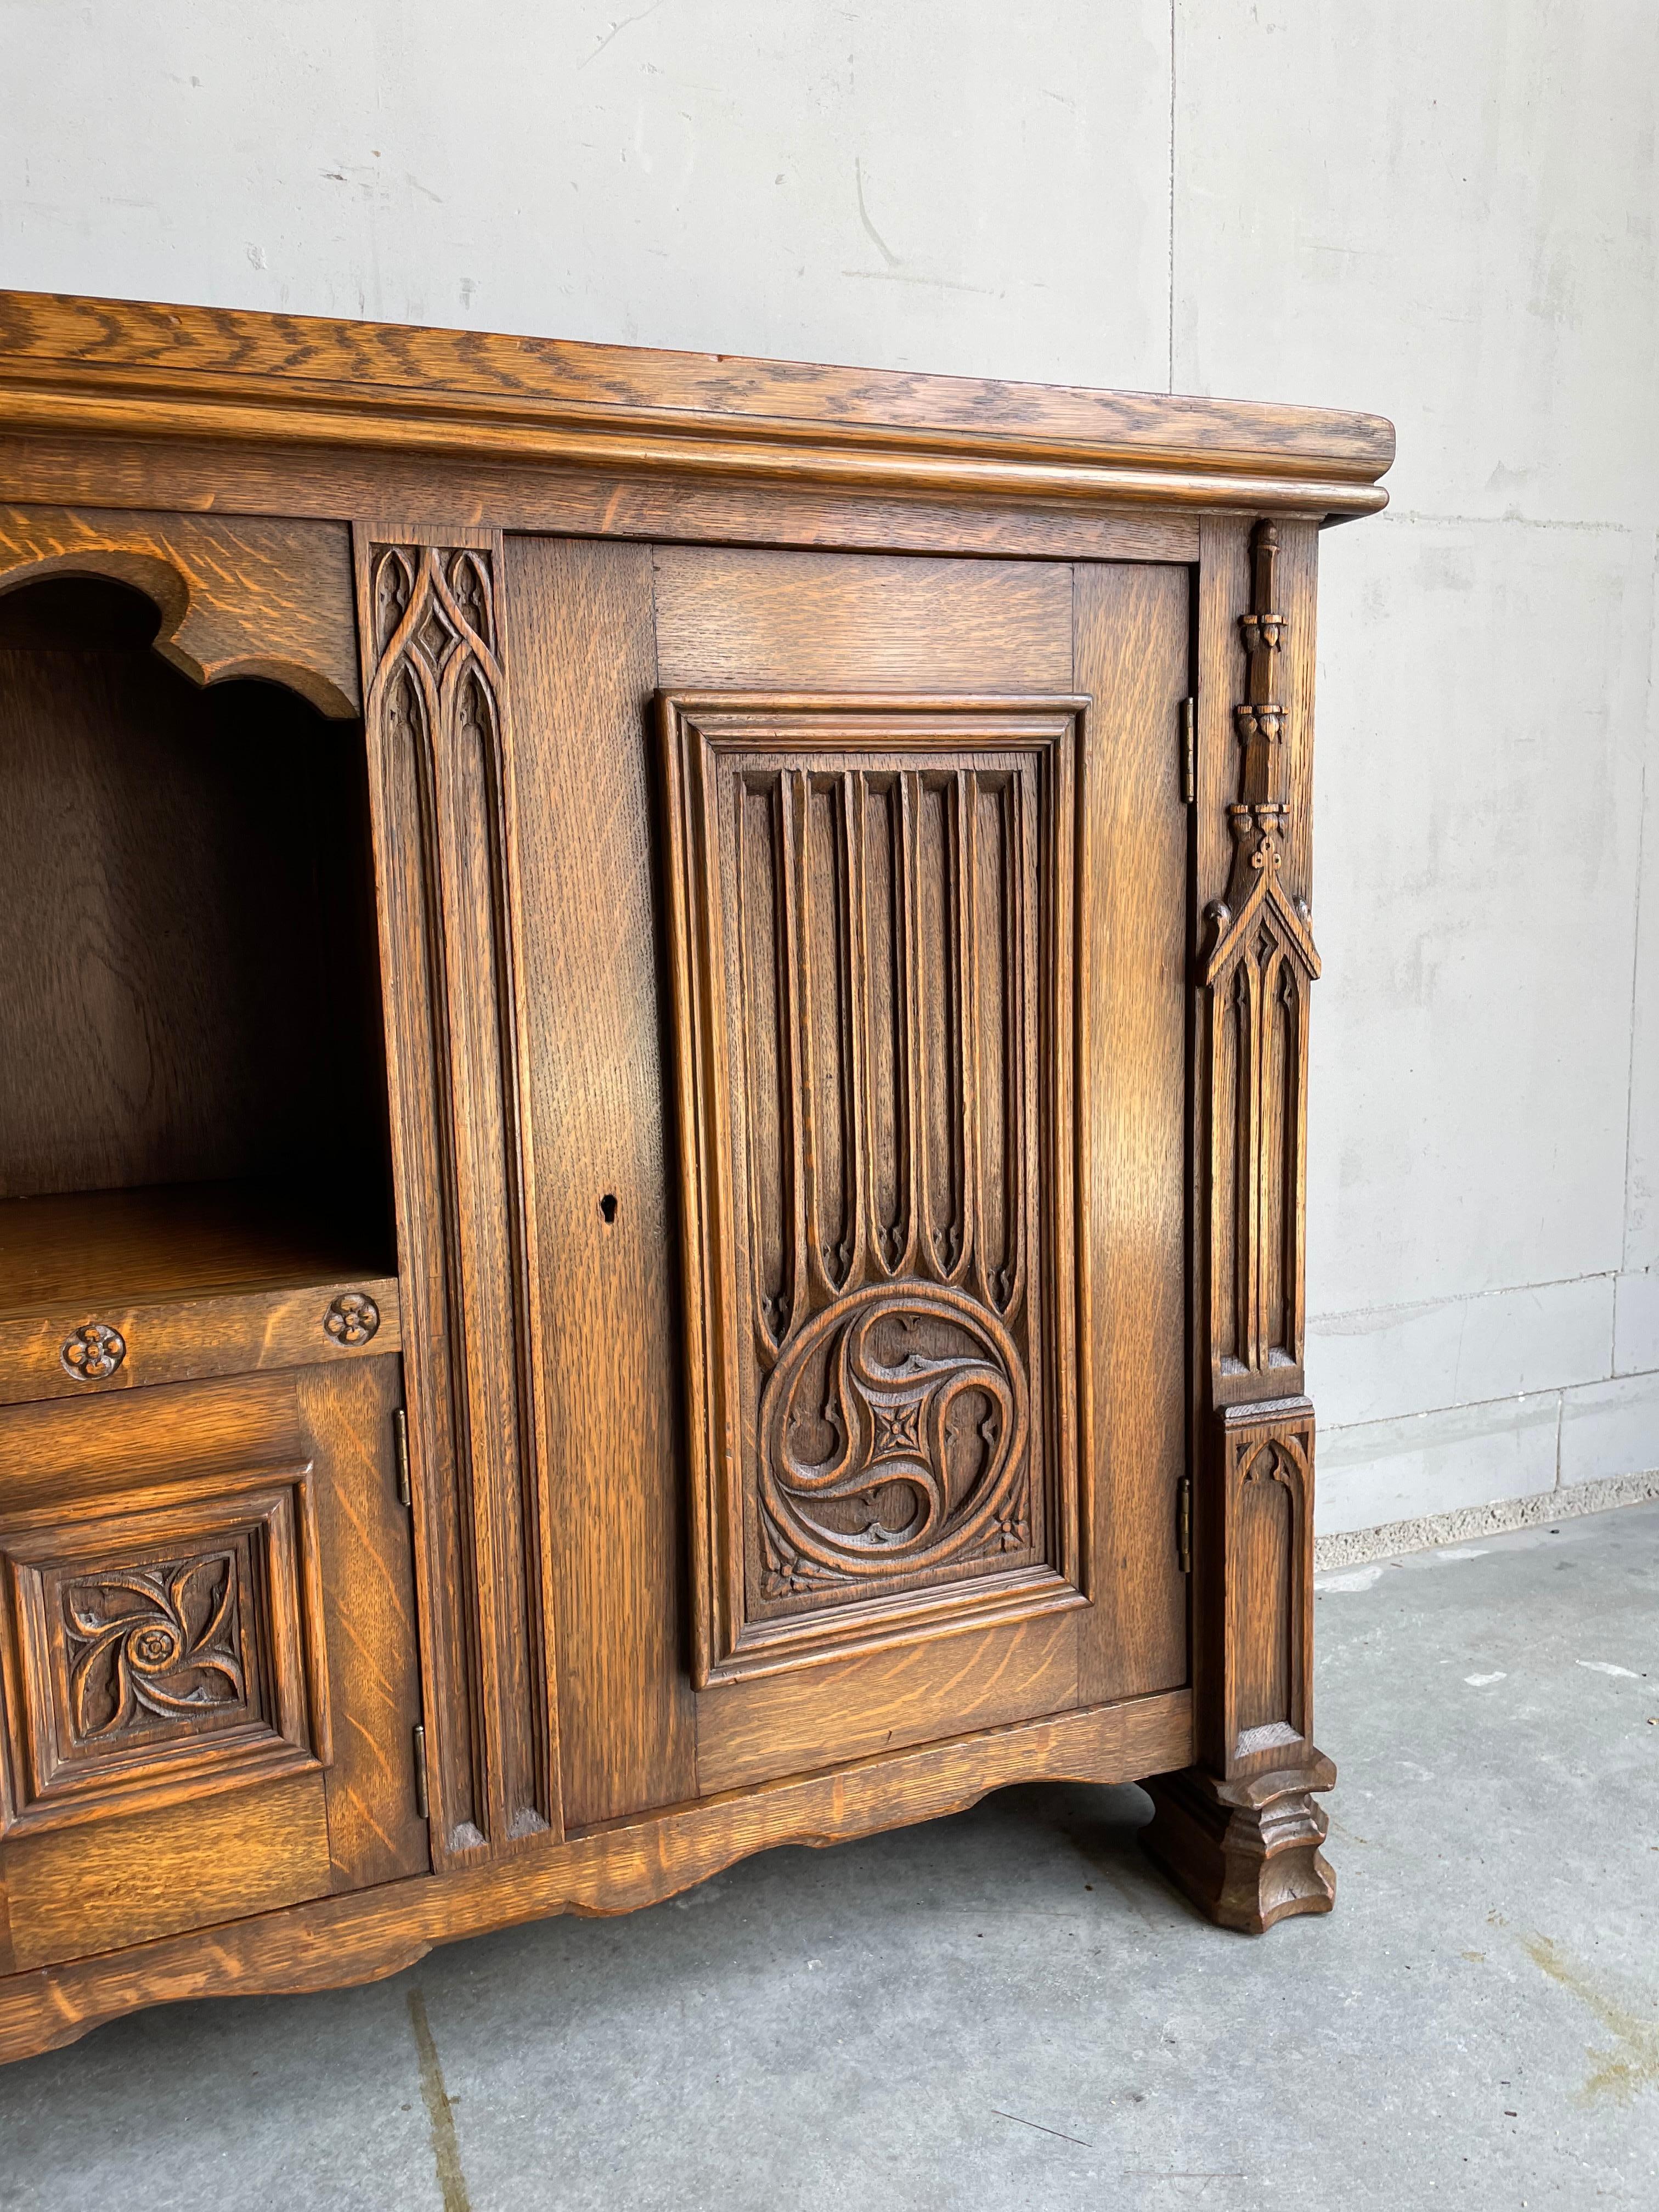 20th Century Gothic Revival Solid Oak Sideboard / Sidetable / 1930s Small 4-Door Credenza